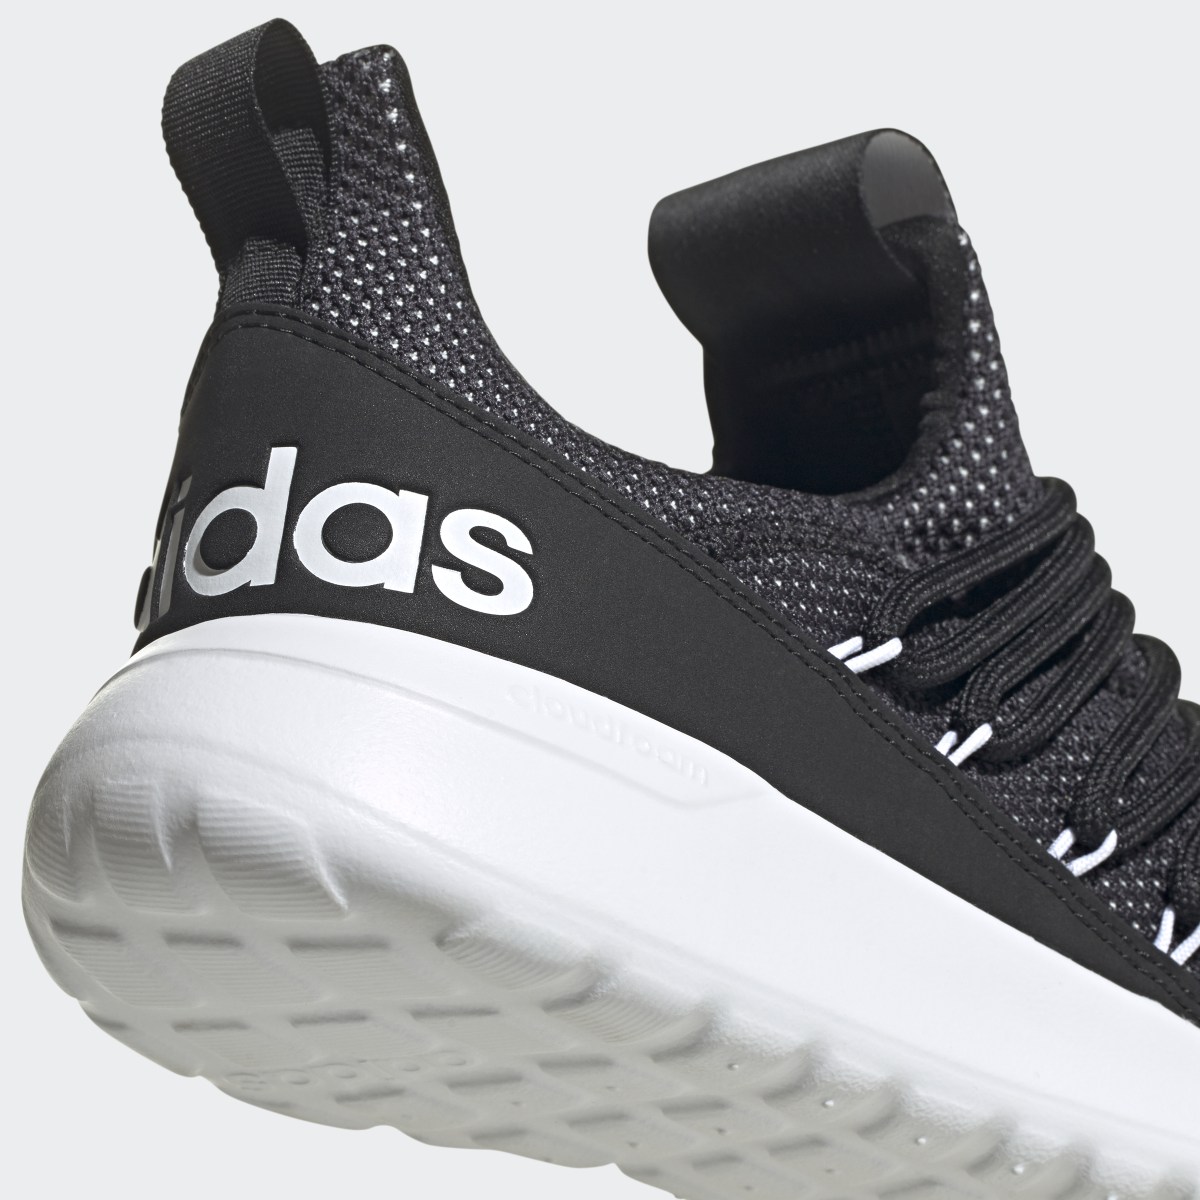 Adidas Lite Racer Adapt 3 Shoes. 8